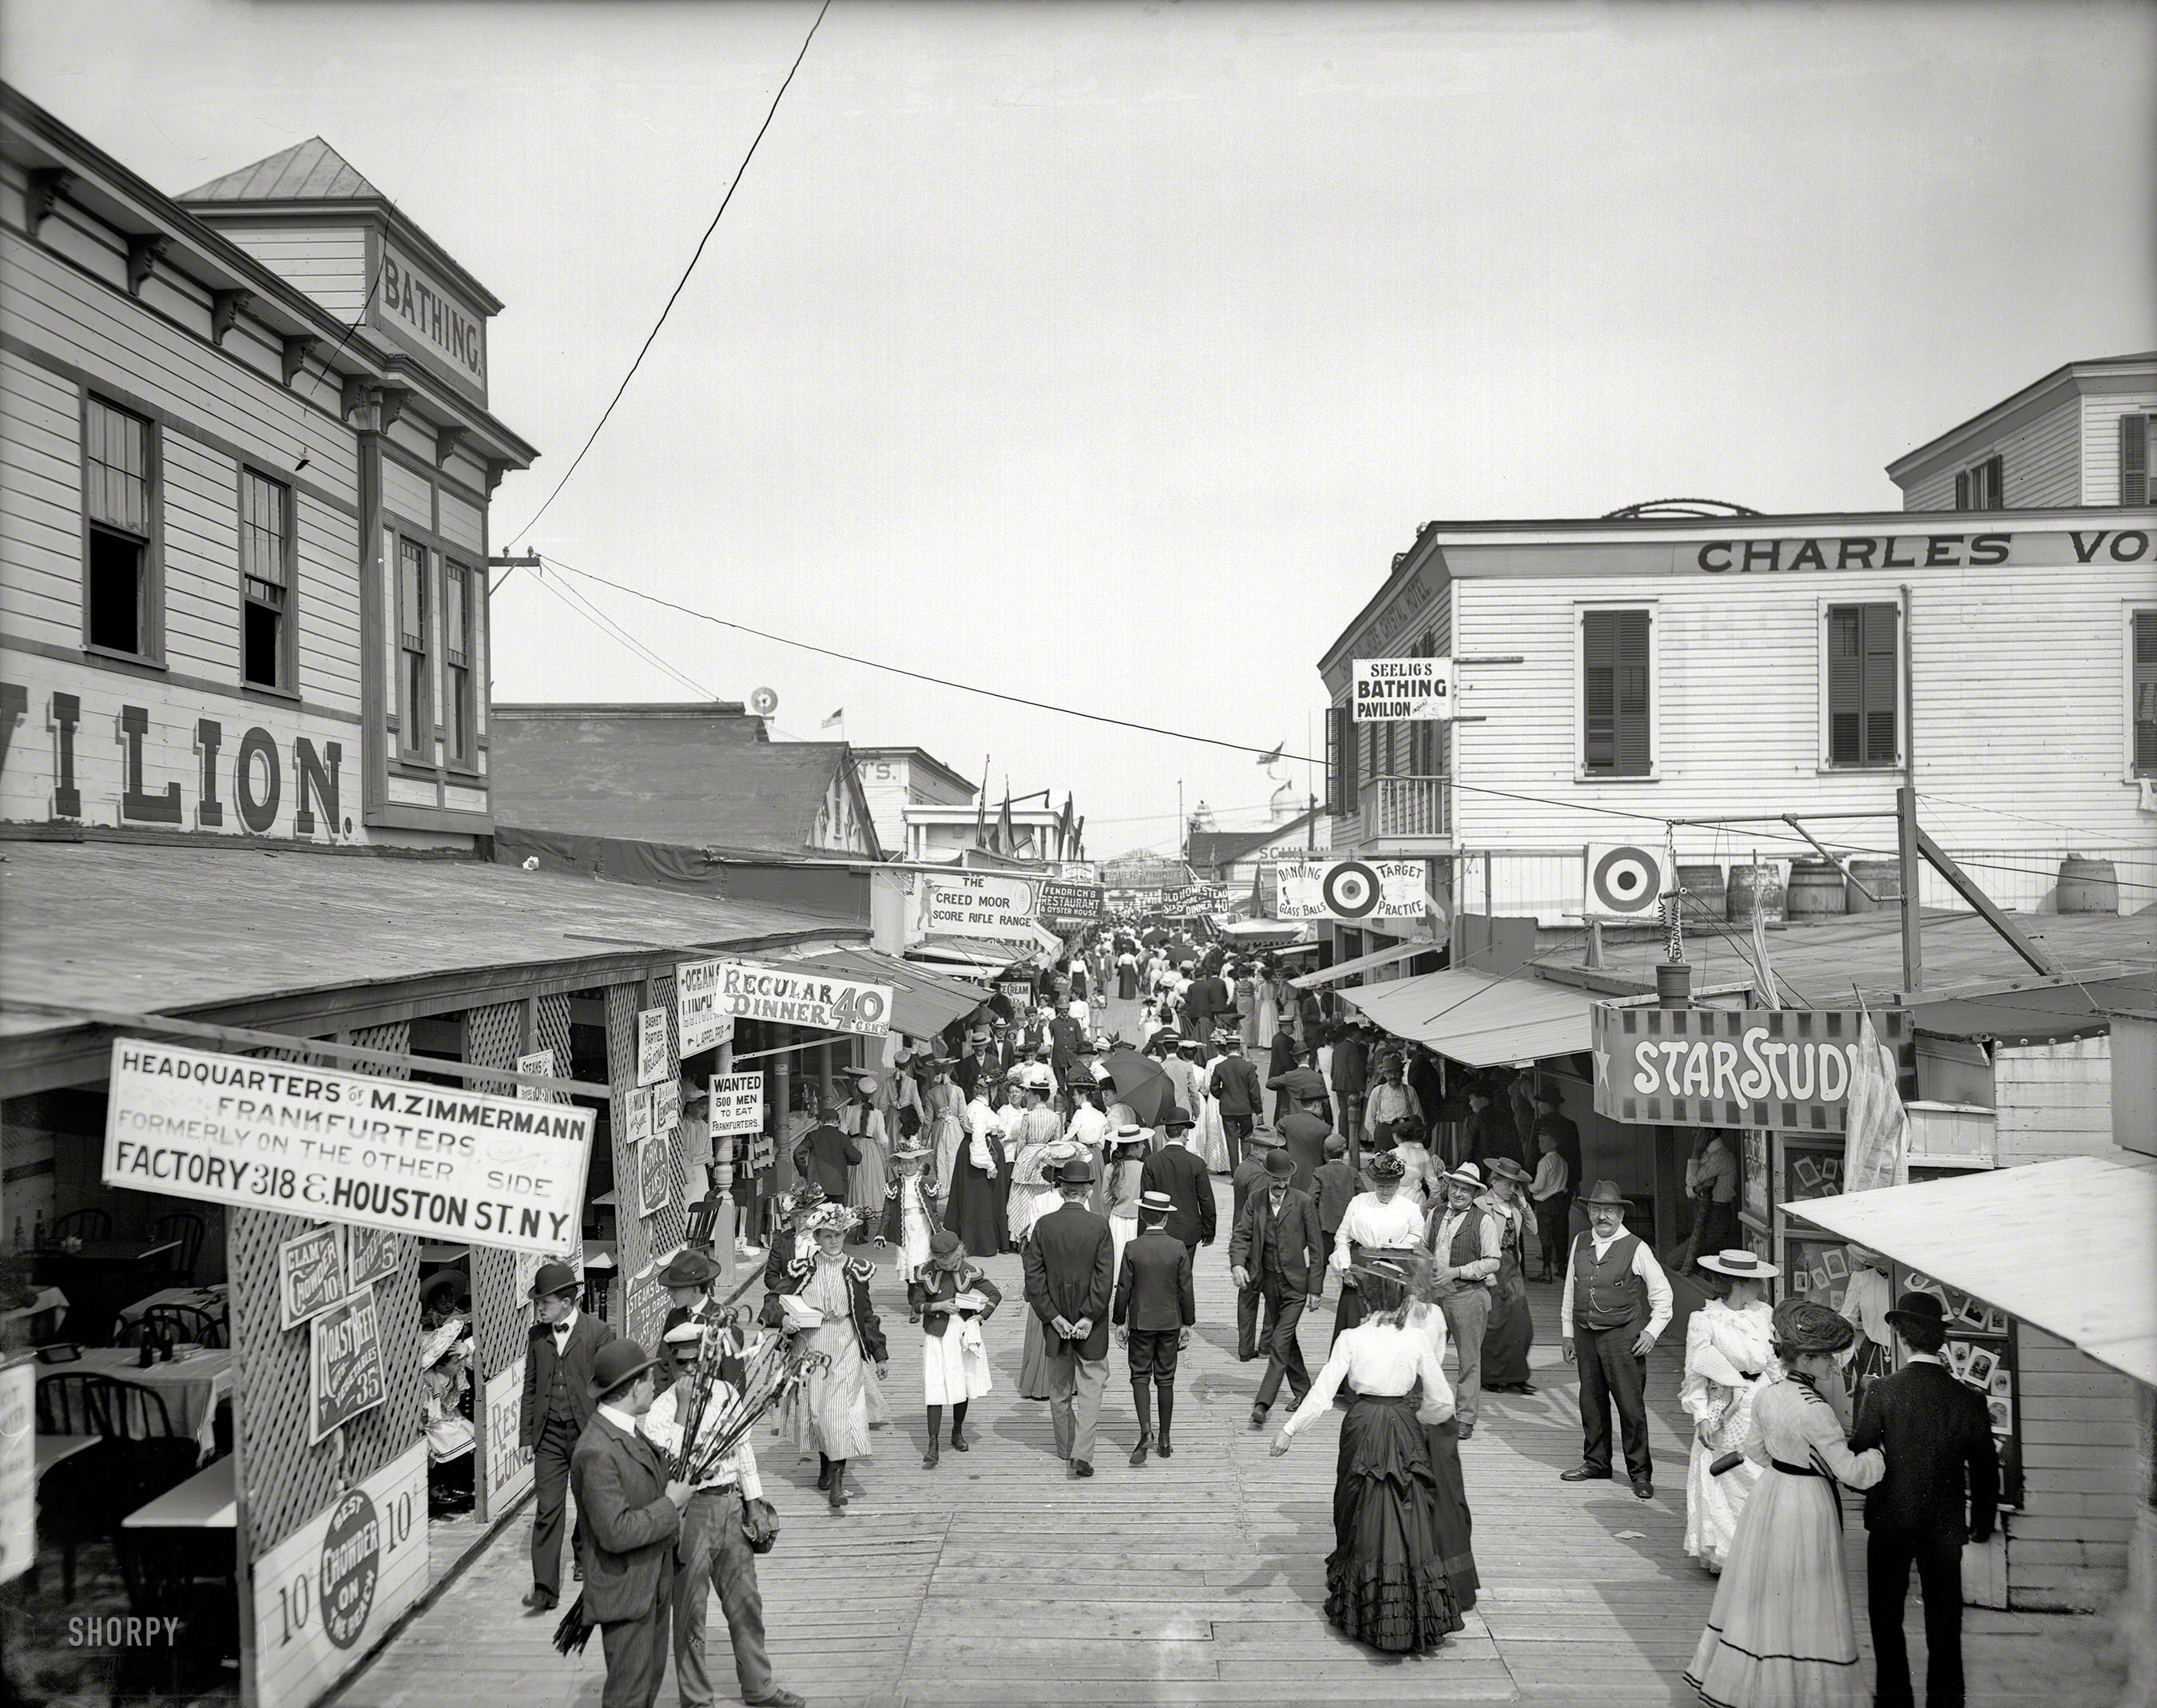 Rockaway, New York, circa 1905. "The Bowery looking east." Much intriguing signage here. 8x10 inch glass negative, Detroit Publishing Co. View full size.